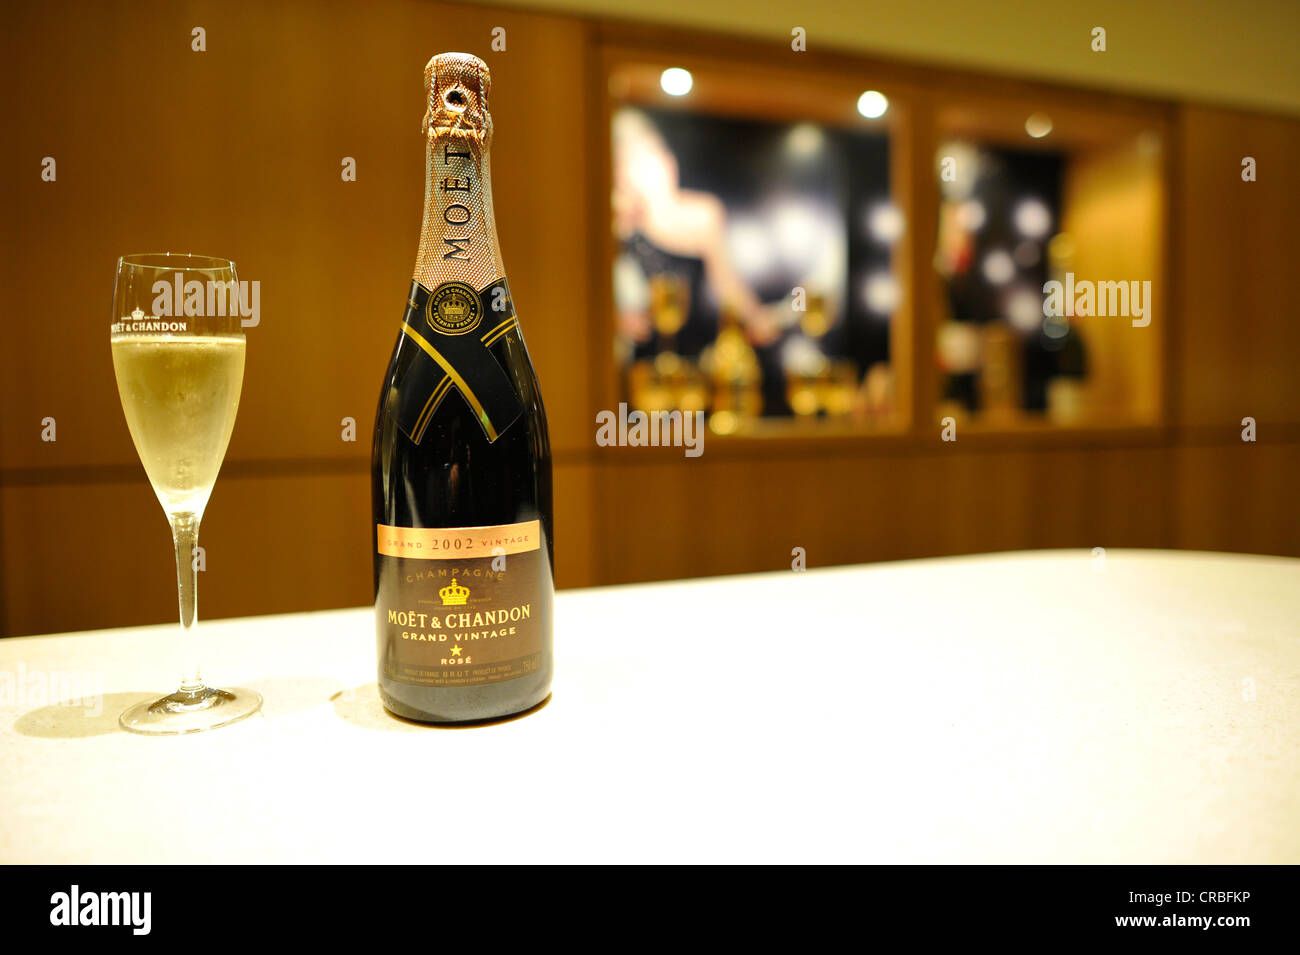 Champagne glass and champagne bottle, Grand Vintage Rosé, Moet et Chandon winery, LVMH luxury goods group Stock Photo